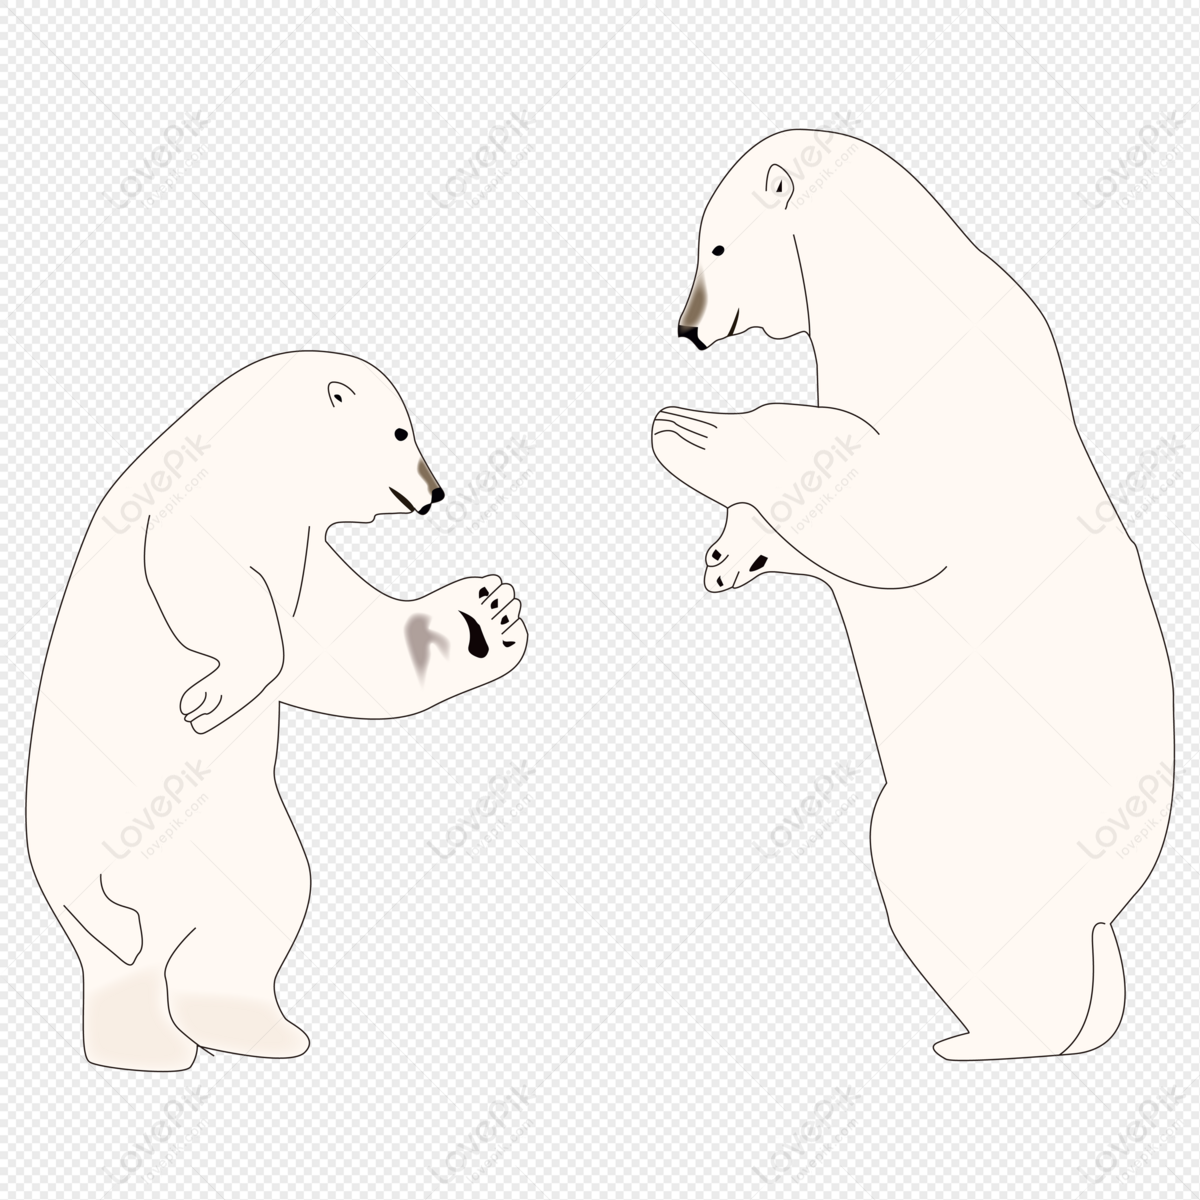 Cartoon Hand Drawn Cute Animal Dancing Polar Bear PNG Transparent  Background And Clipart Image For Free Download - Lovepik | 401361420